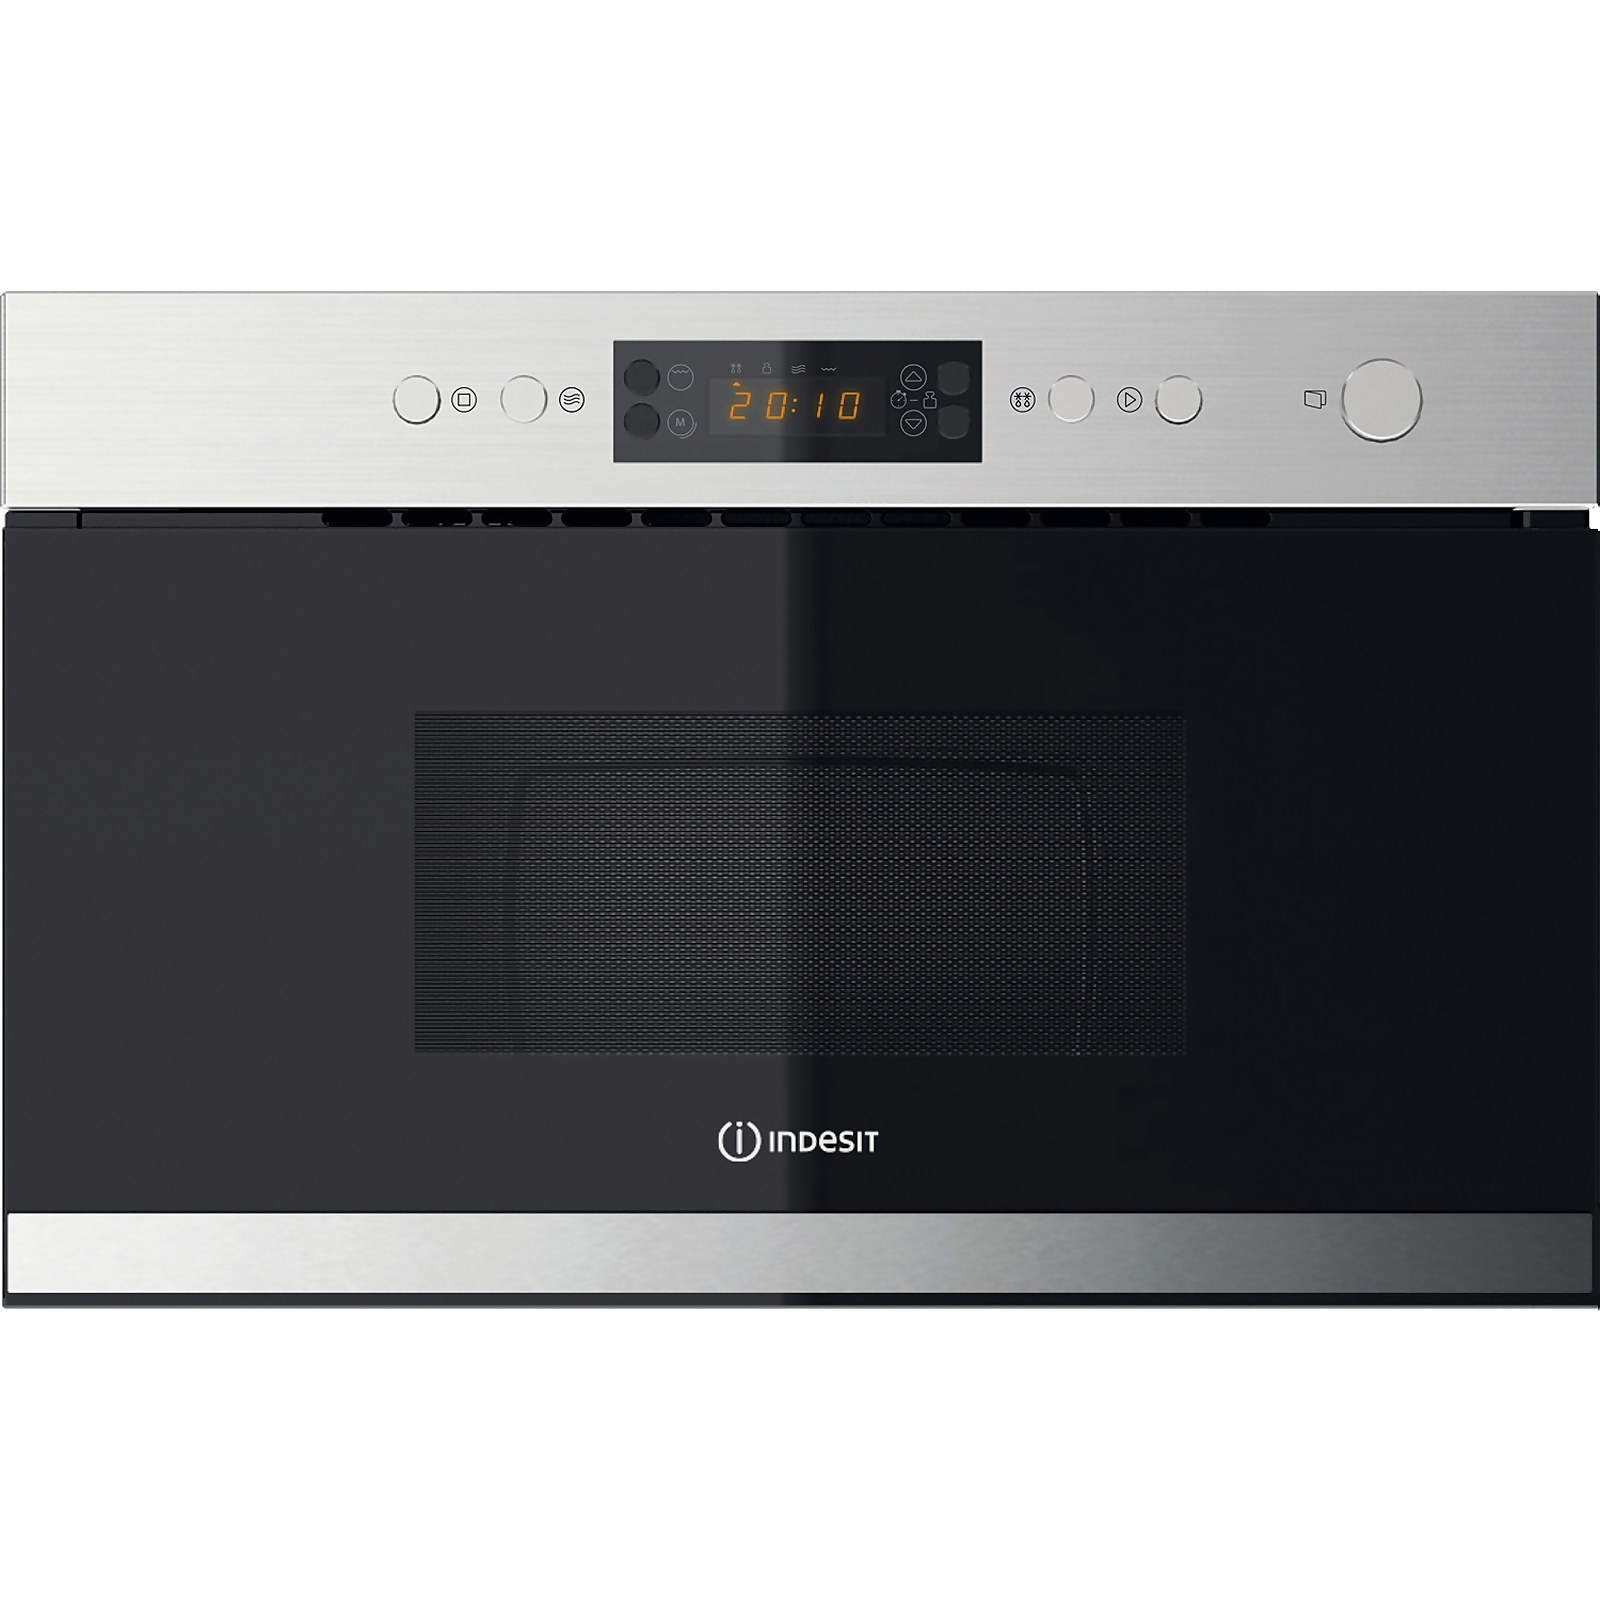 Indesit Aria MWI3213IX Built In Microwave With Grill - Stainless Steel